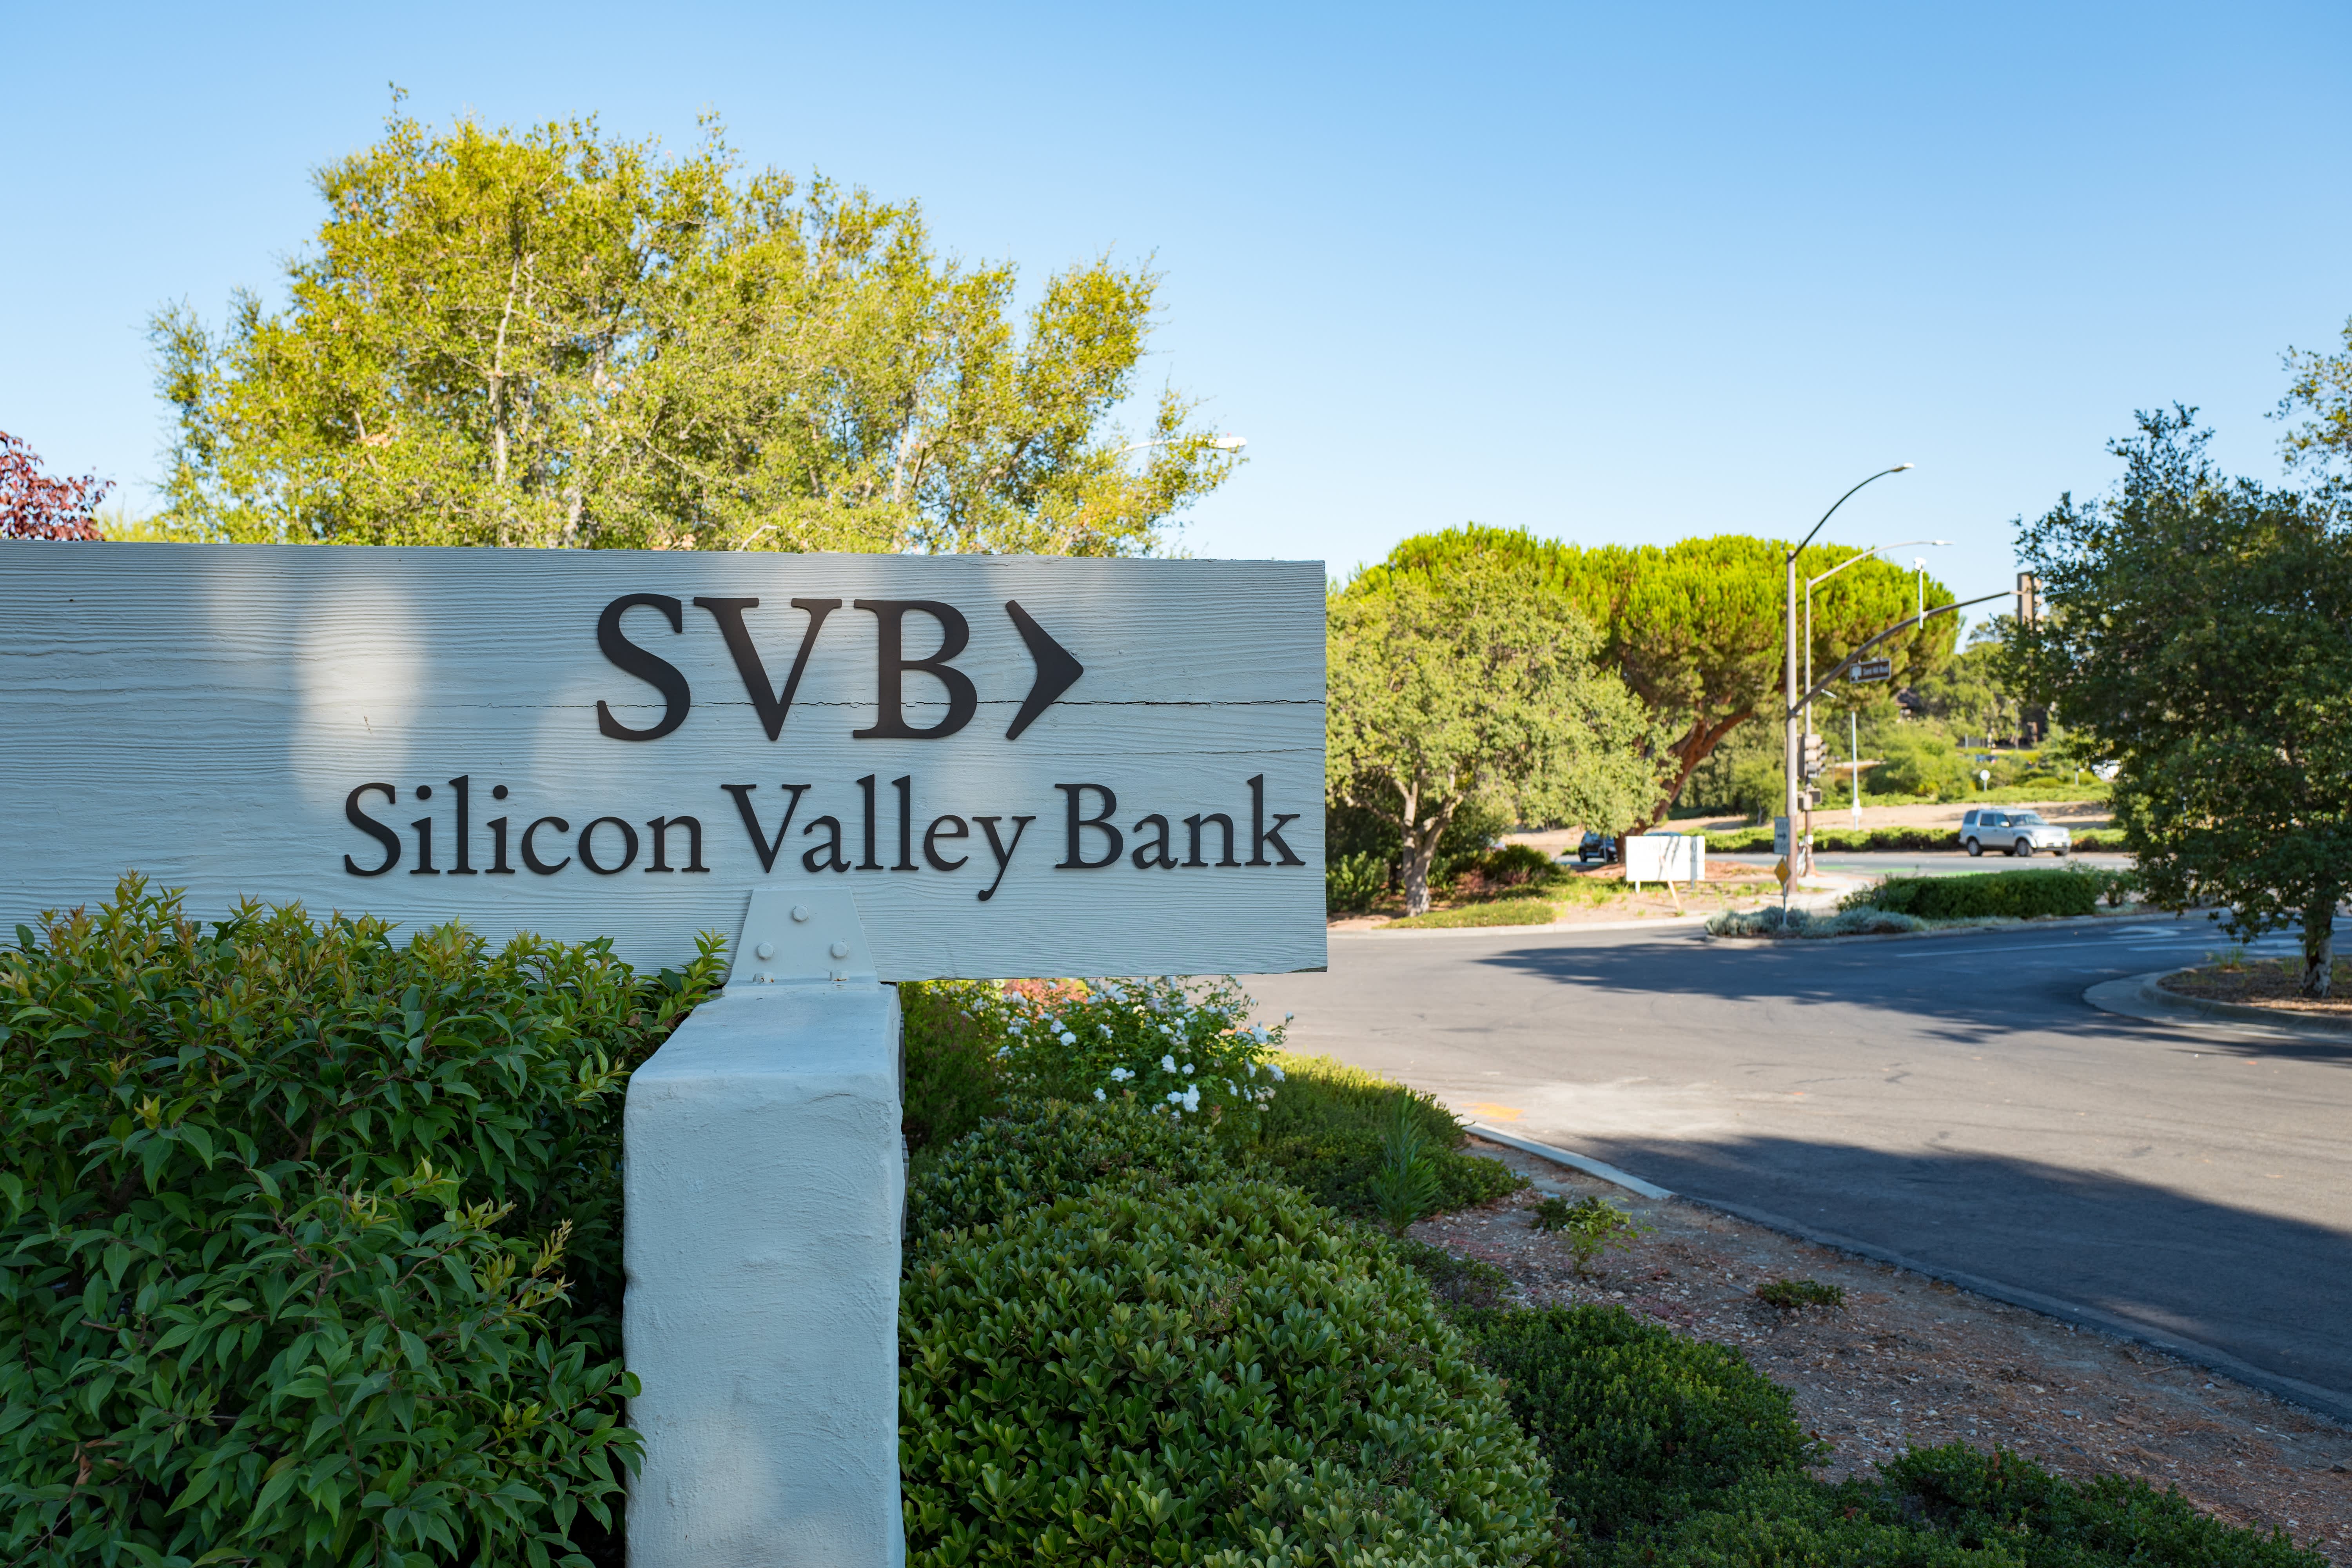 Silicon Valley Bank blowup highlights deposit risks vs Treasurys